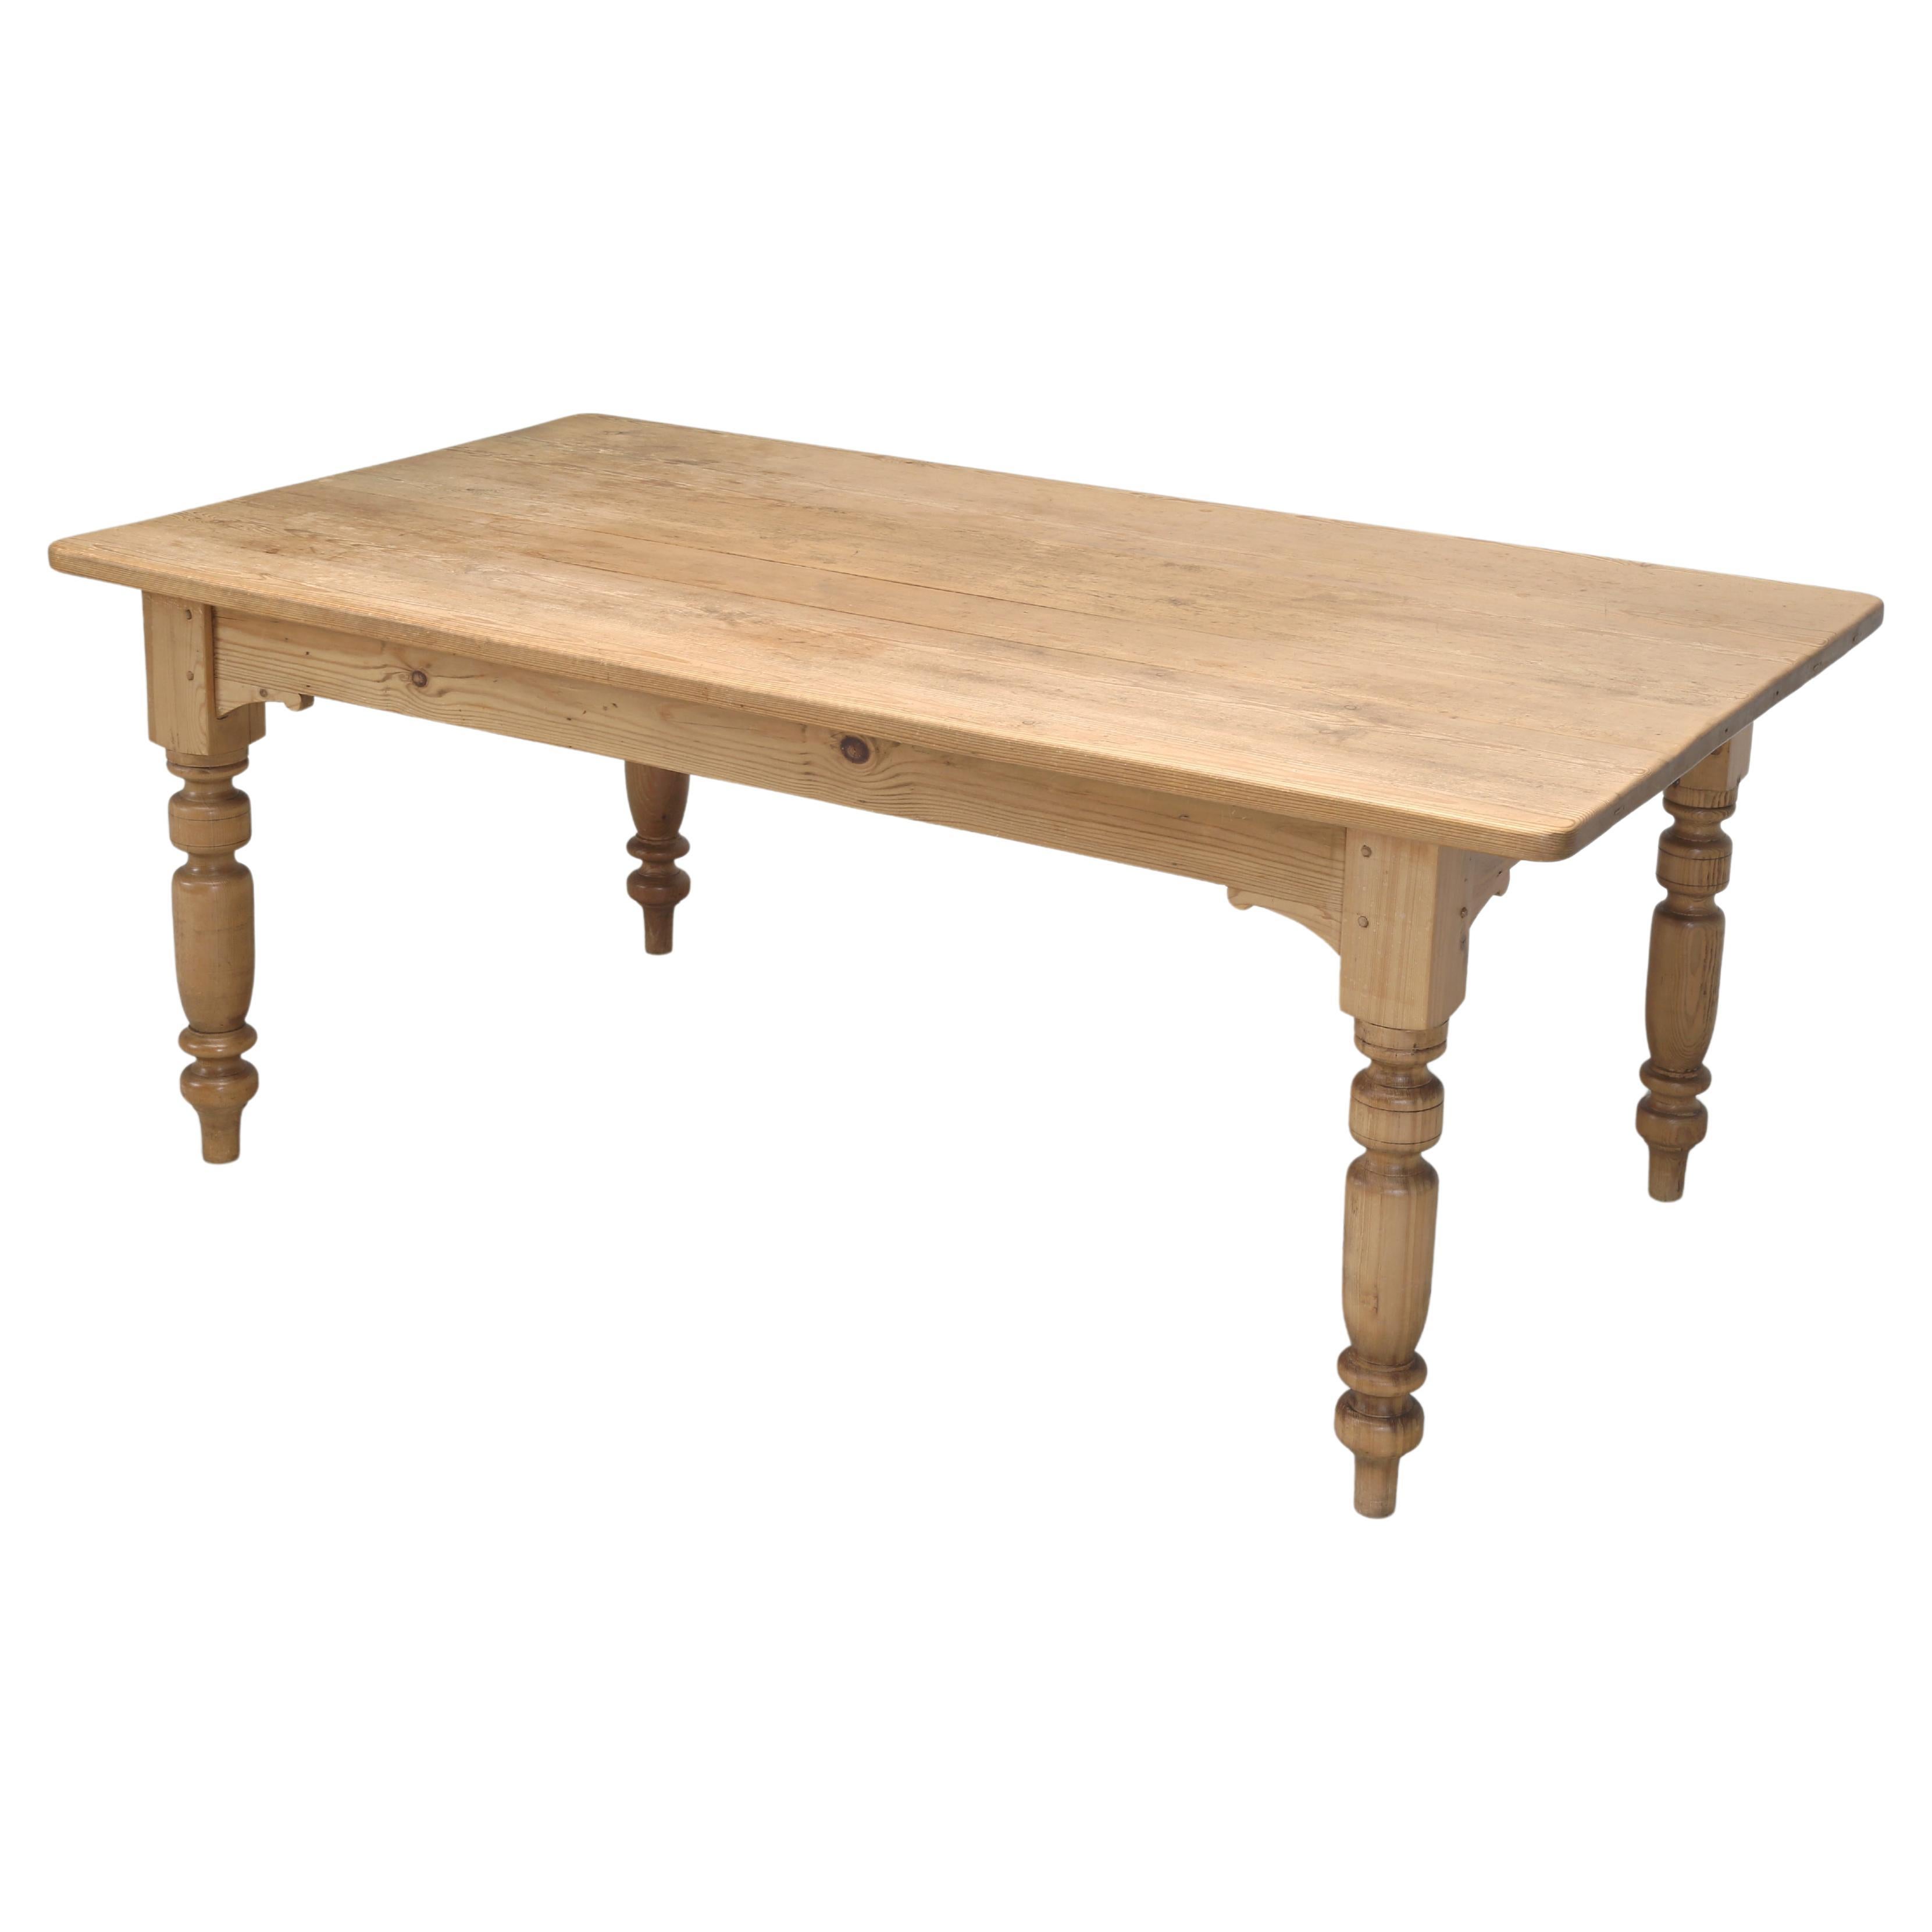 Vintage English Pine Farm Table or Kitchen Table Made from Reclaimed Pine in UK